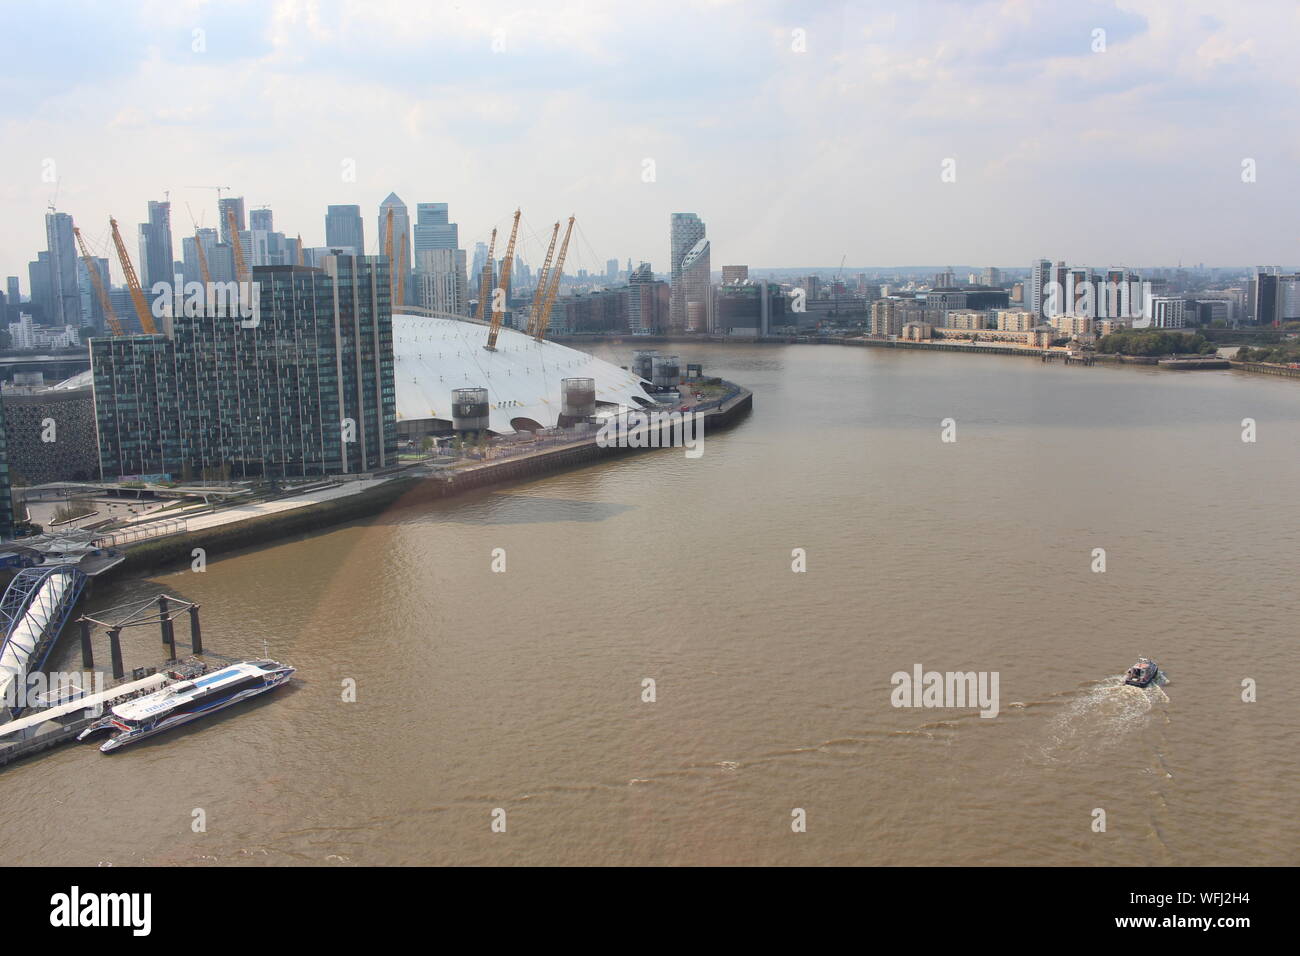 An aerial view from the Emirates cable car over the Thames, including the river Thames, the 02 Arena, Canary Wharf skyline. Stock Photo